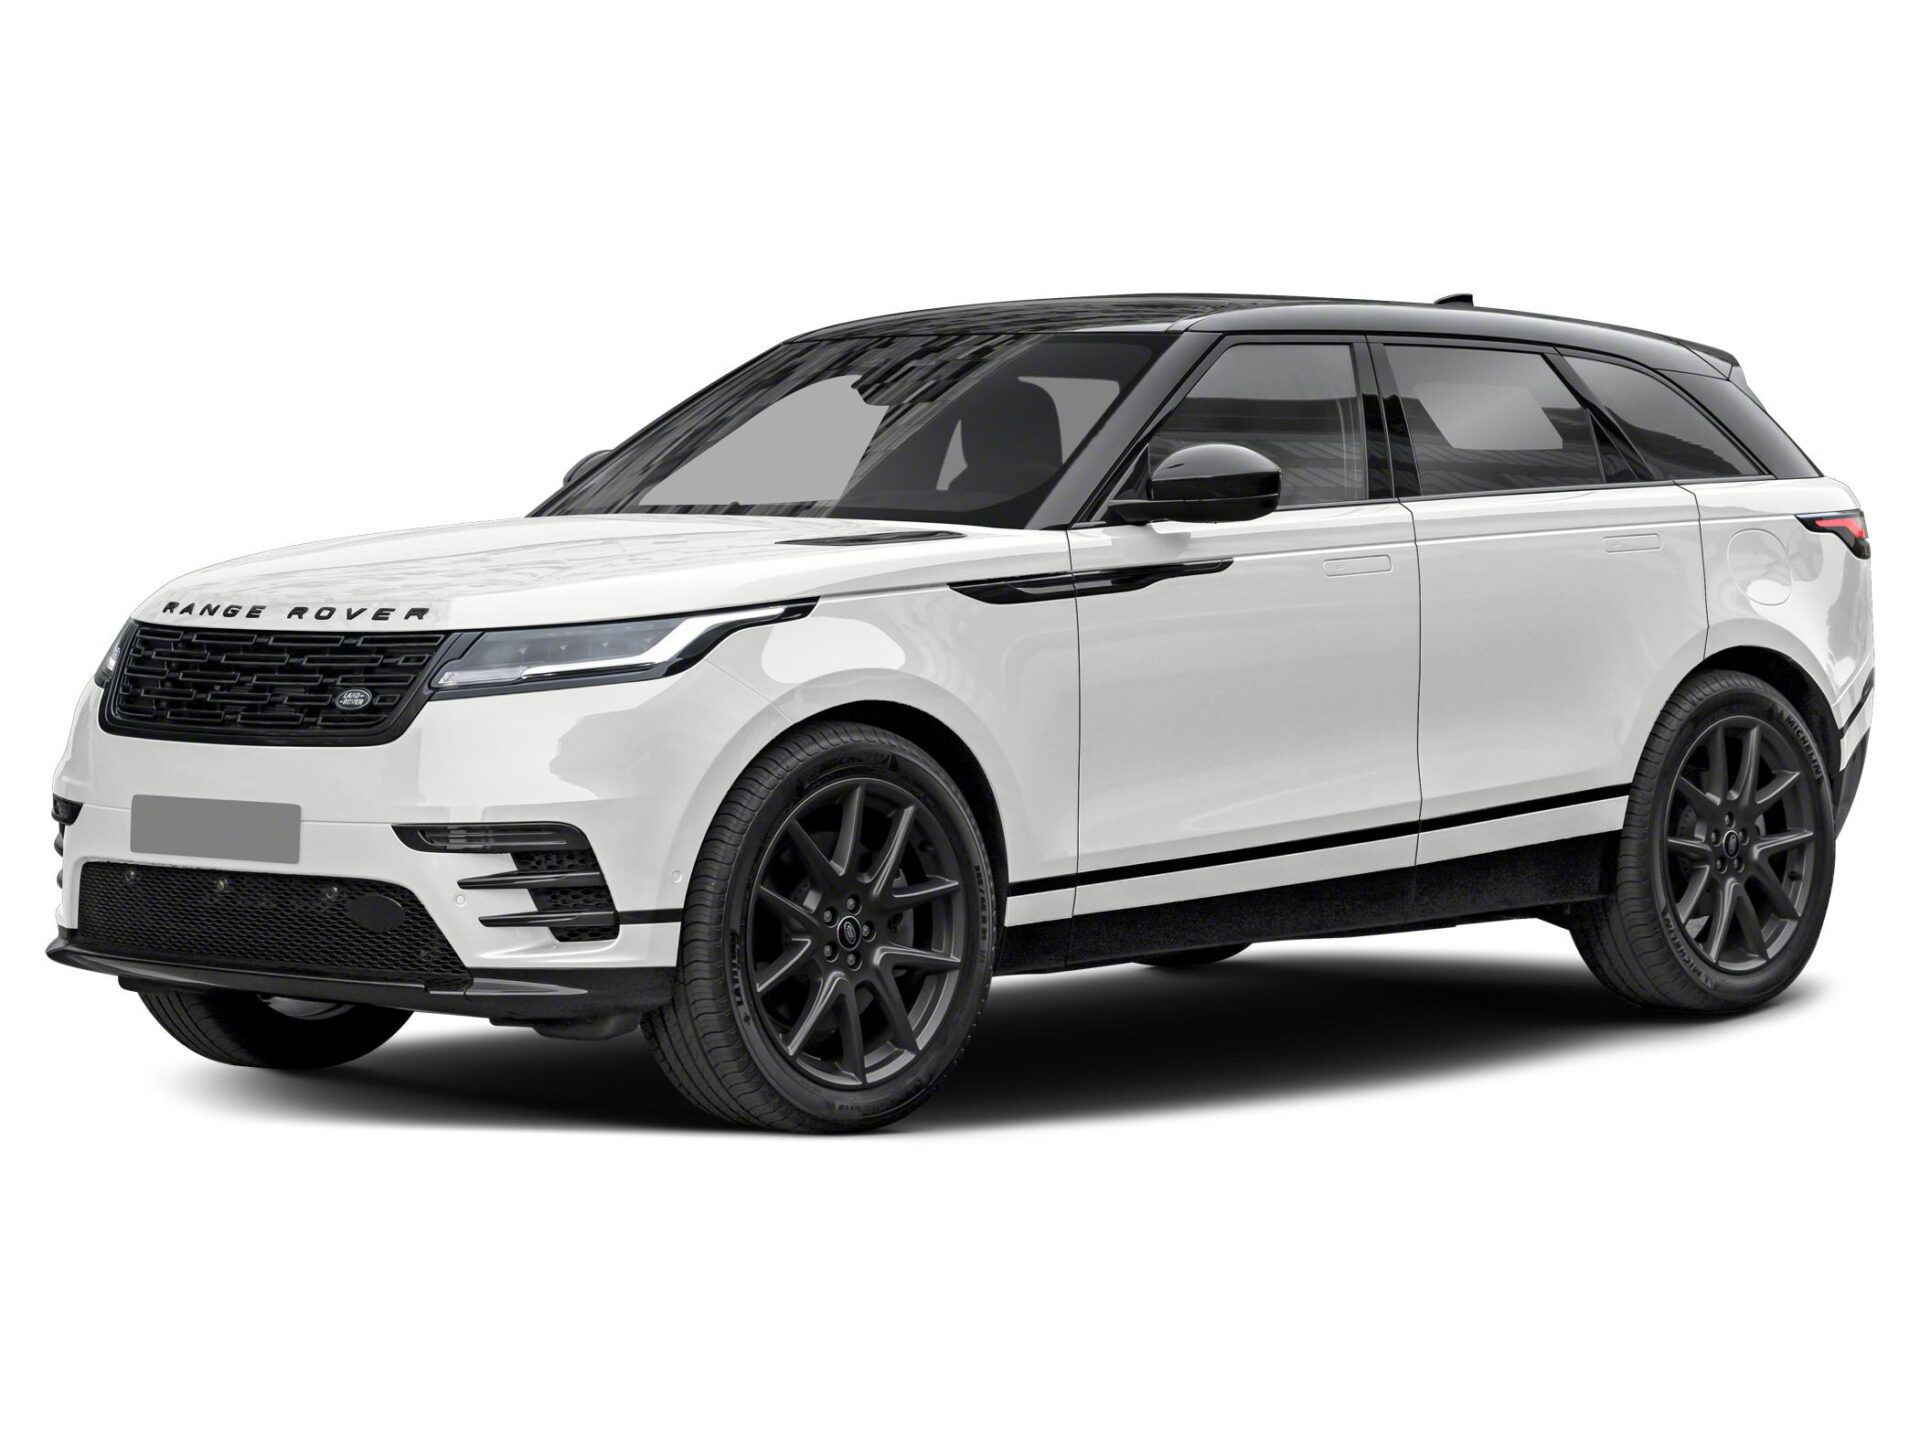 2024 LAND ROVER RANGE ROVER VELAR SUV lease NYC Exterior Front